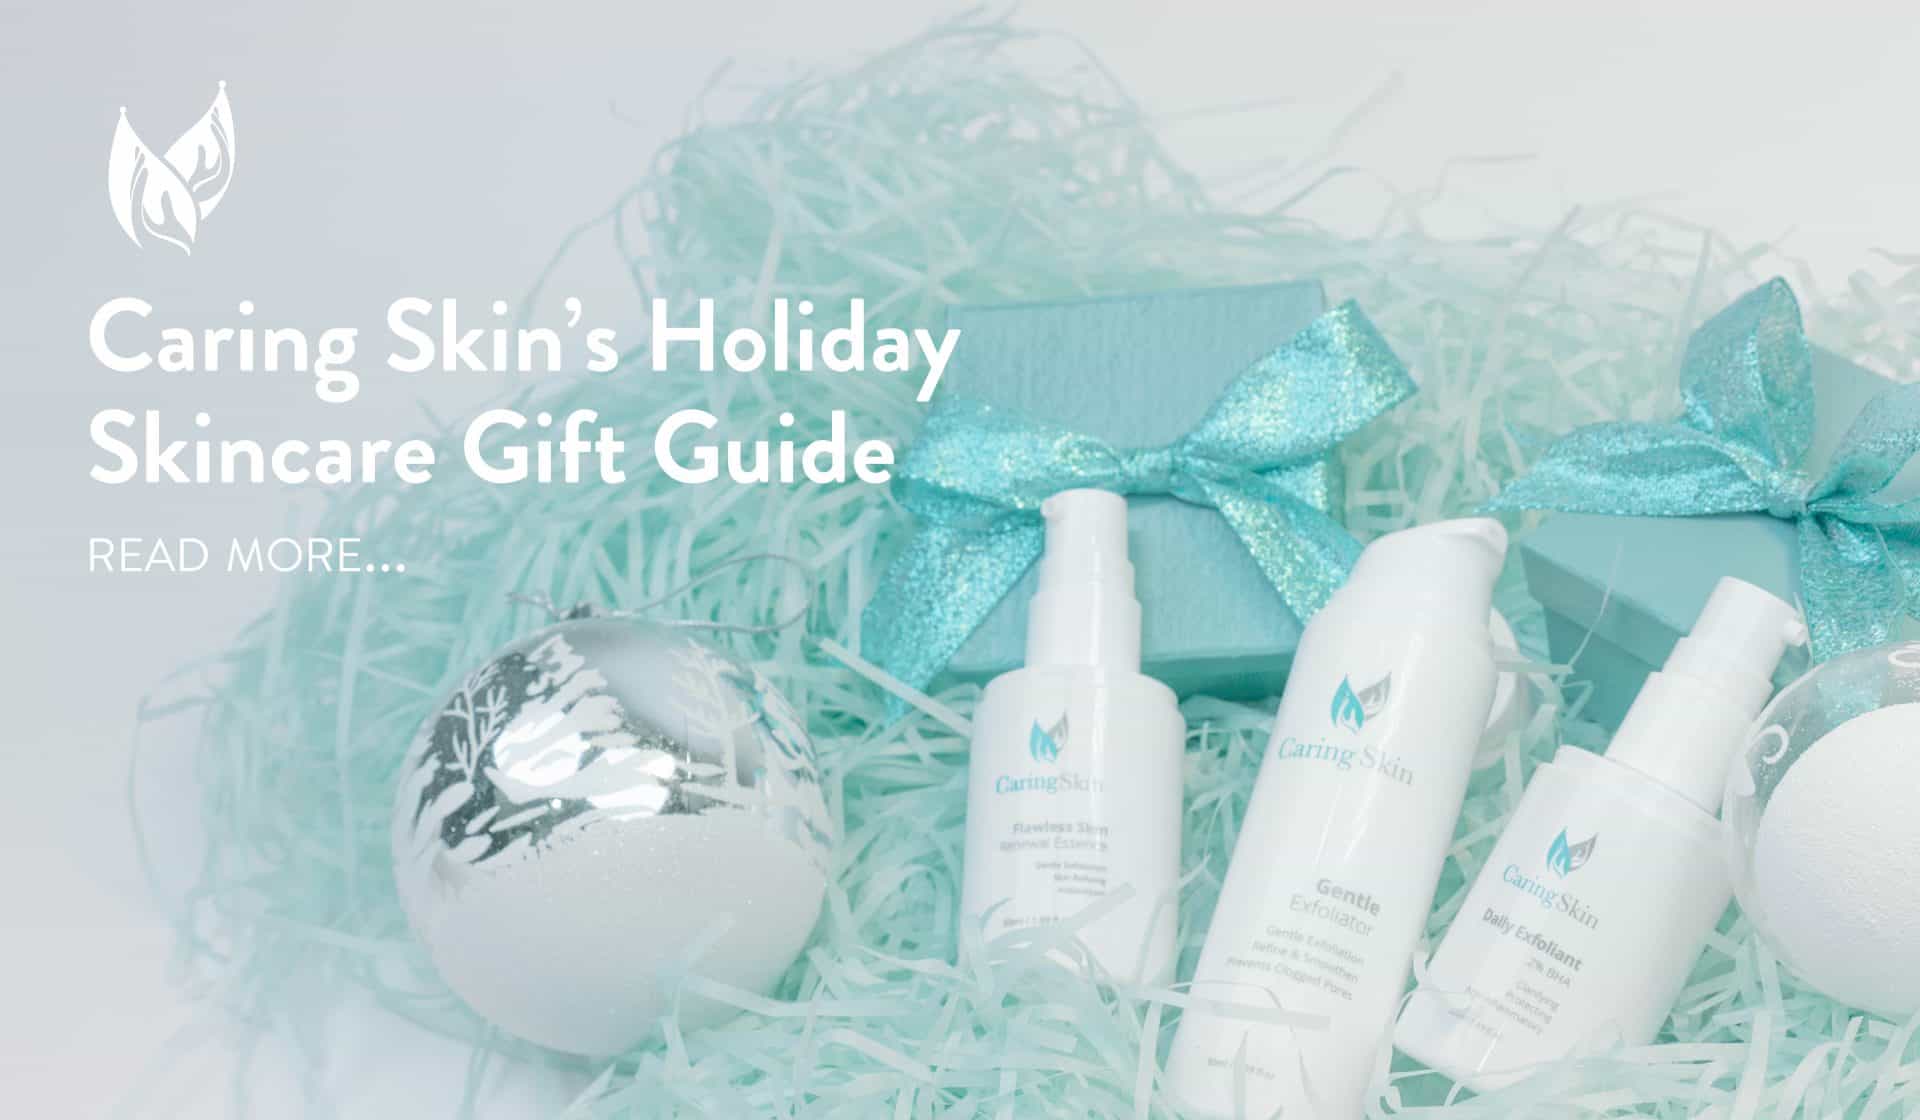 Caring Skin’s Holiday Gift Guide